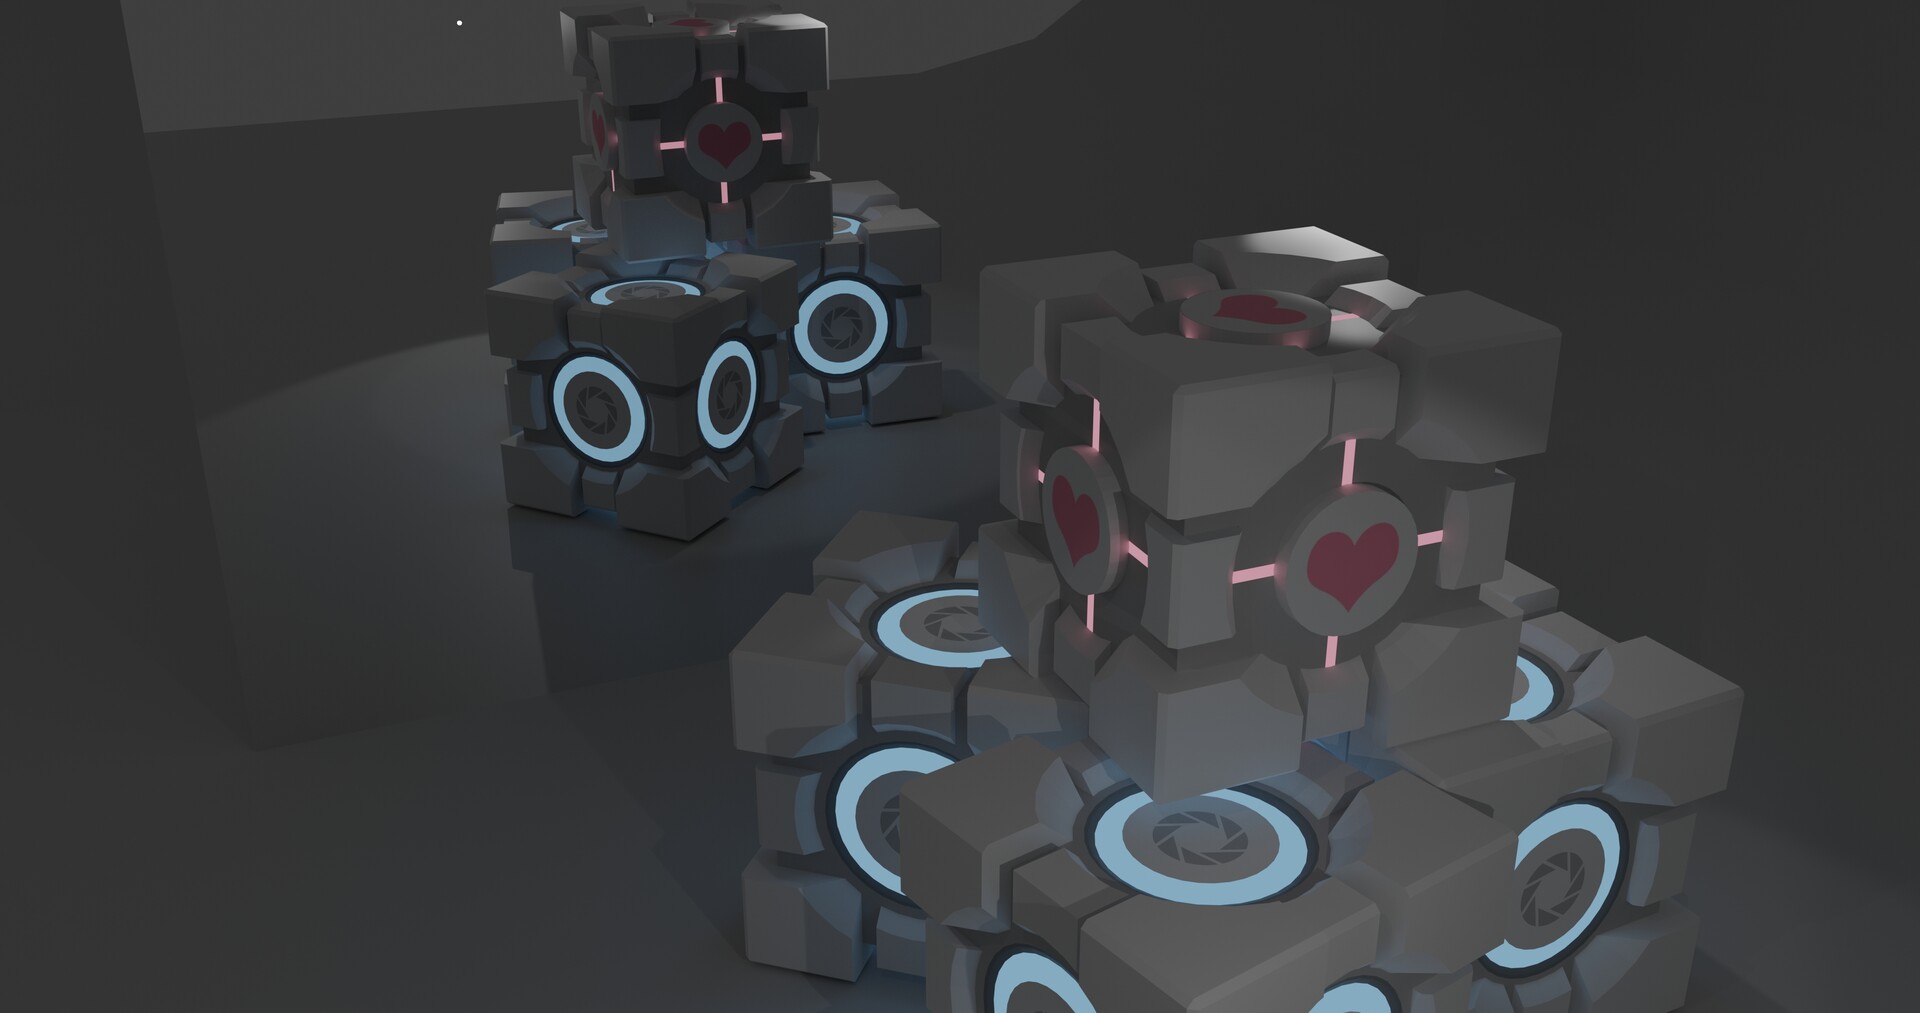 ArtStation - Portal 2 - Companion Cube + Weighted Cube